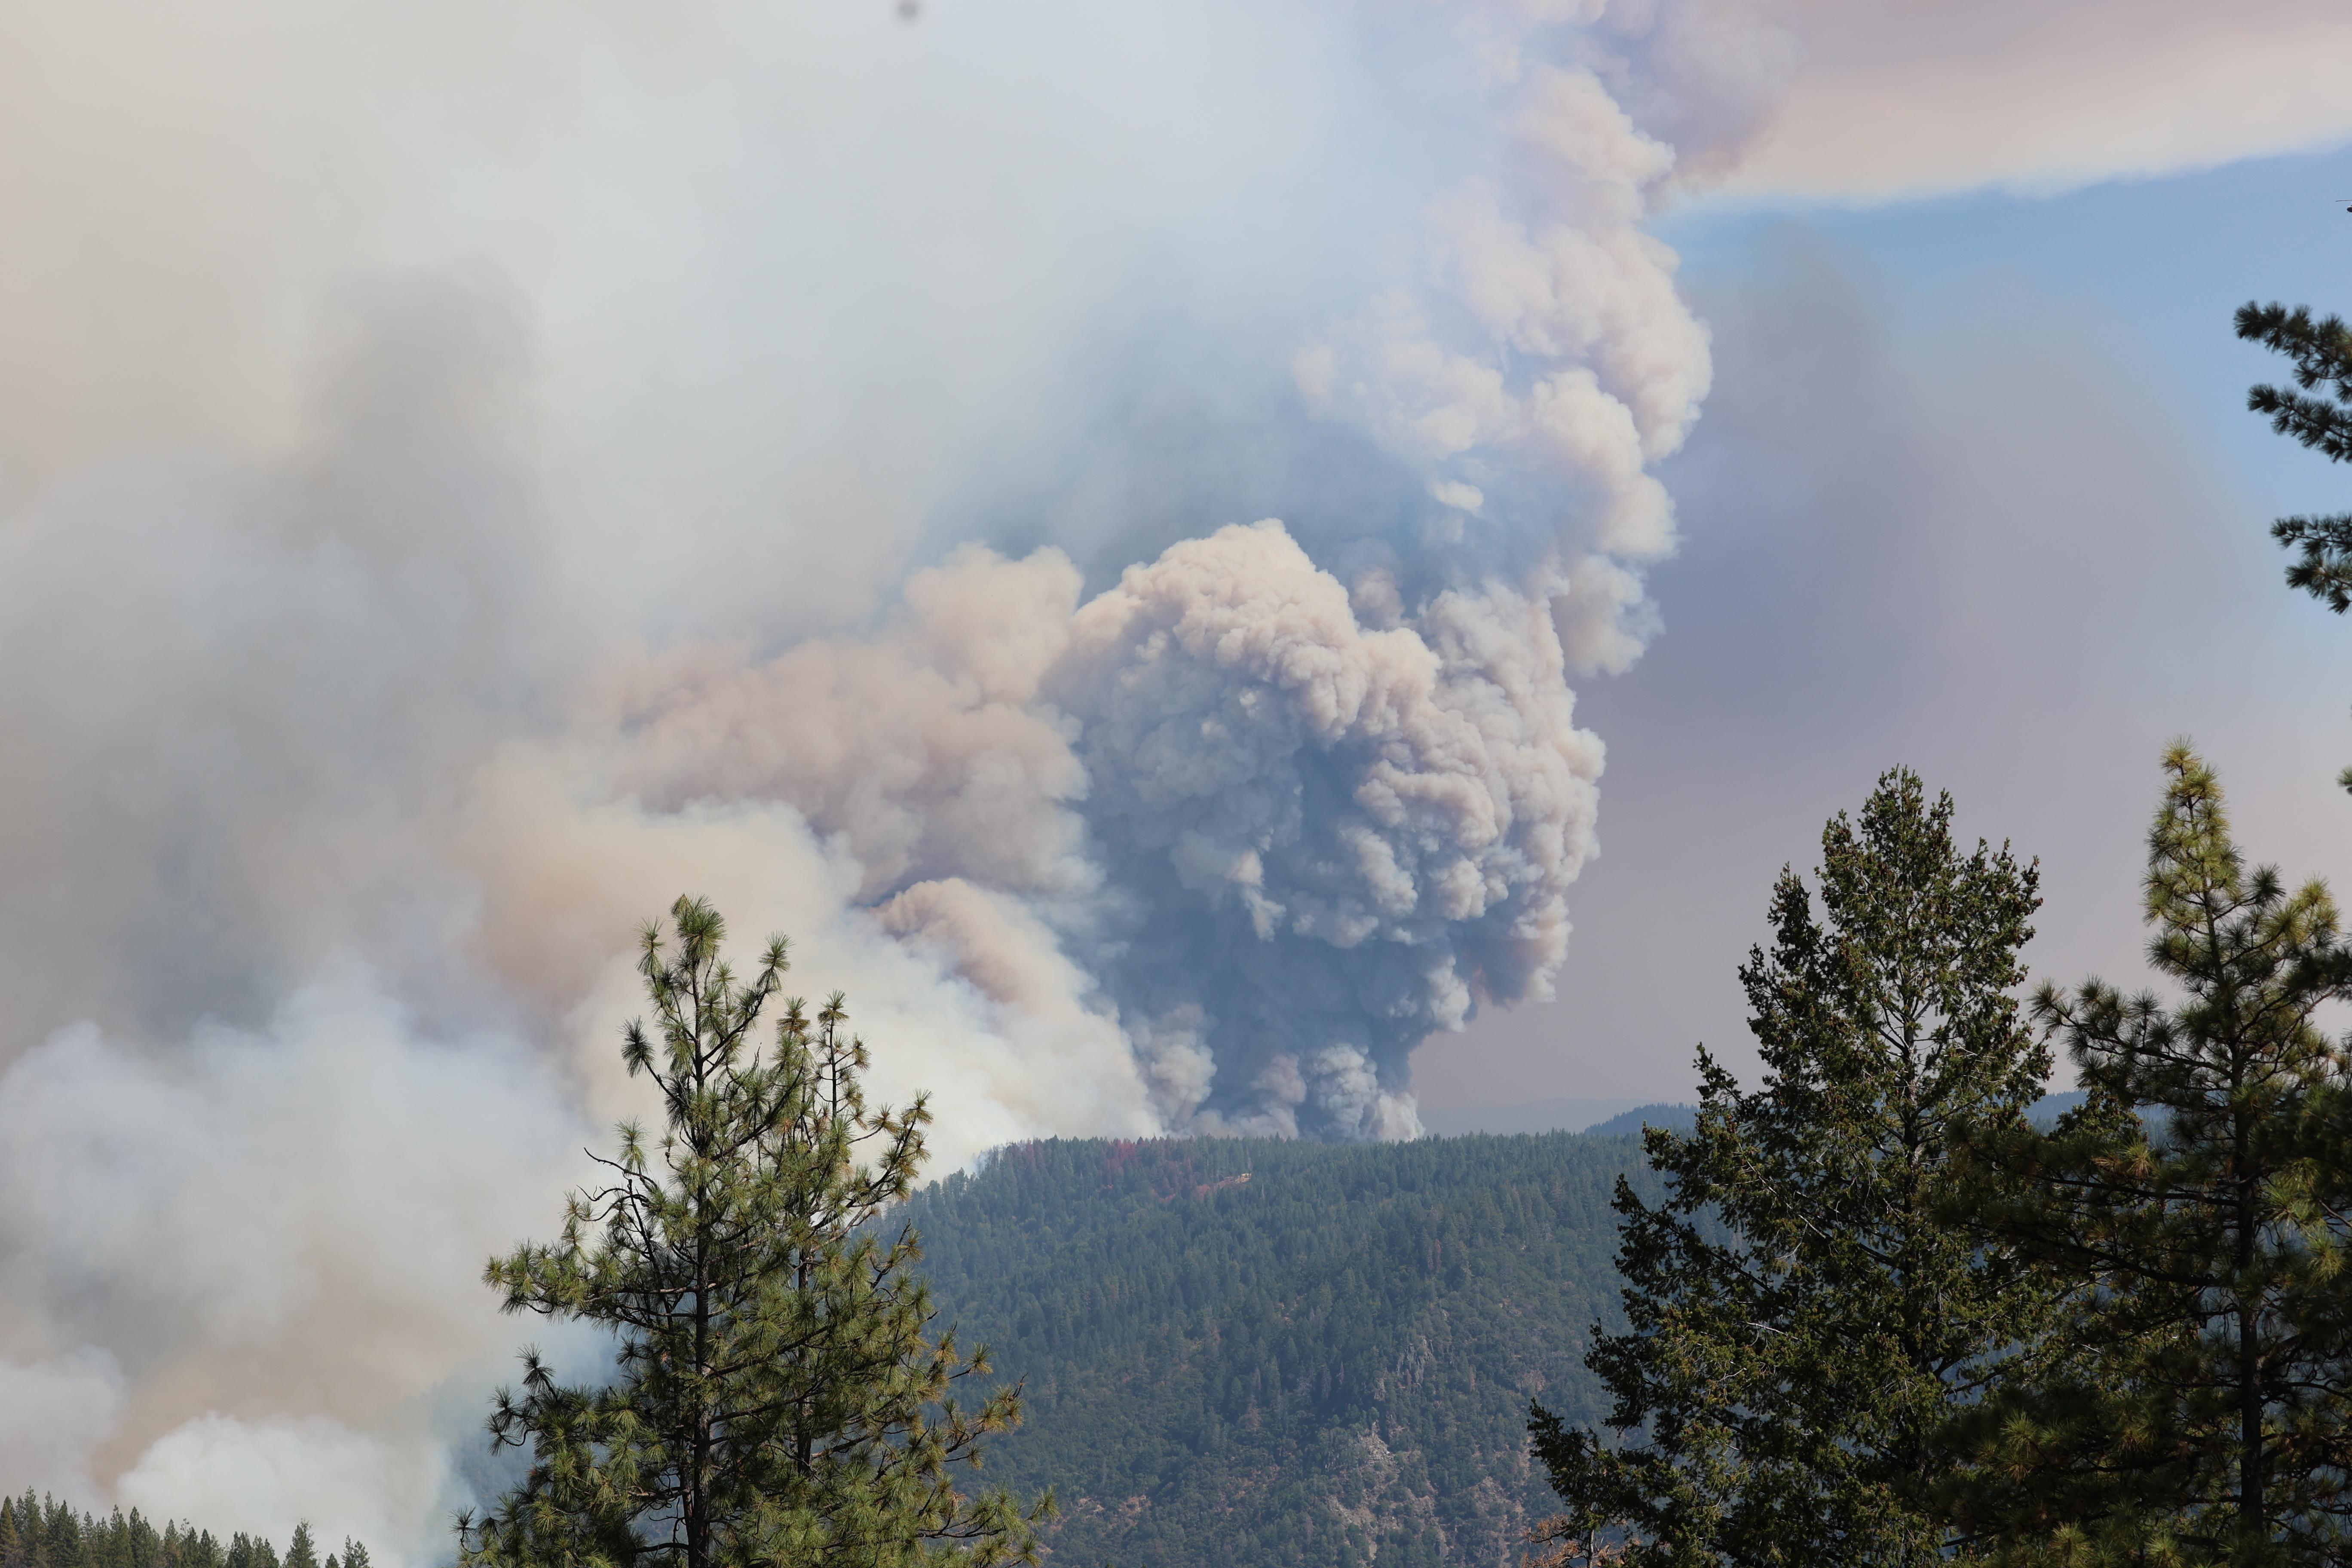 large plume of white and very dark smoke coming from the fire burning in coniferous-covered mountainside